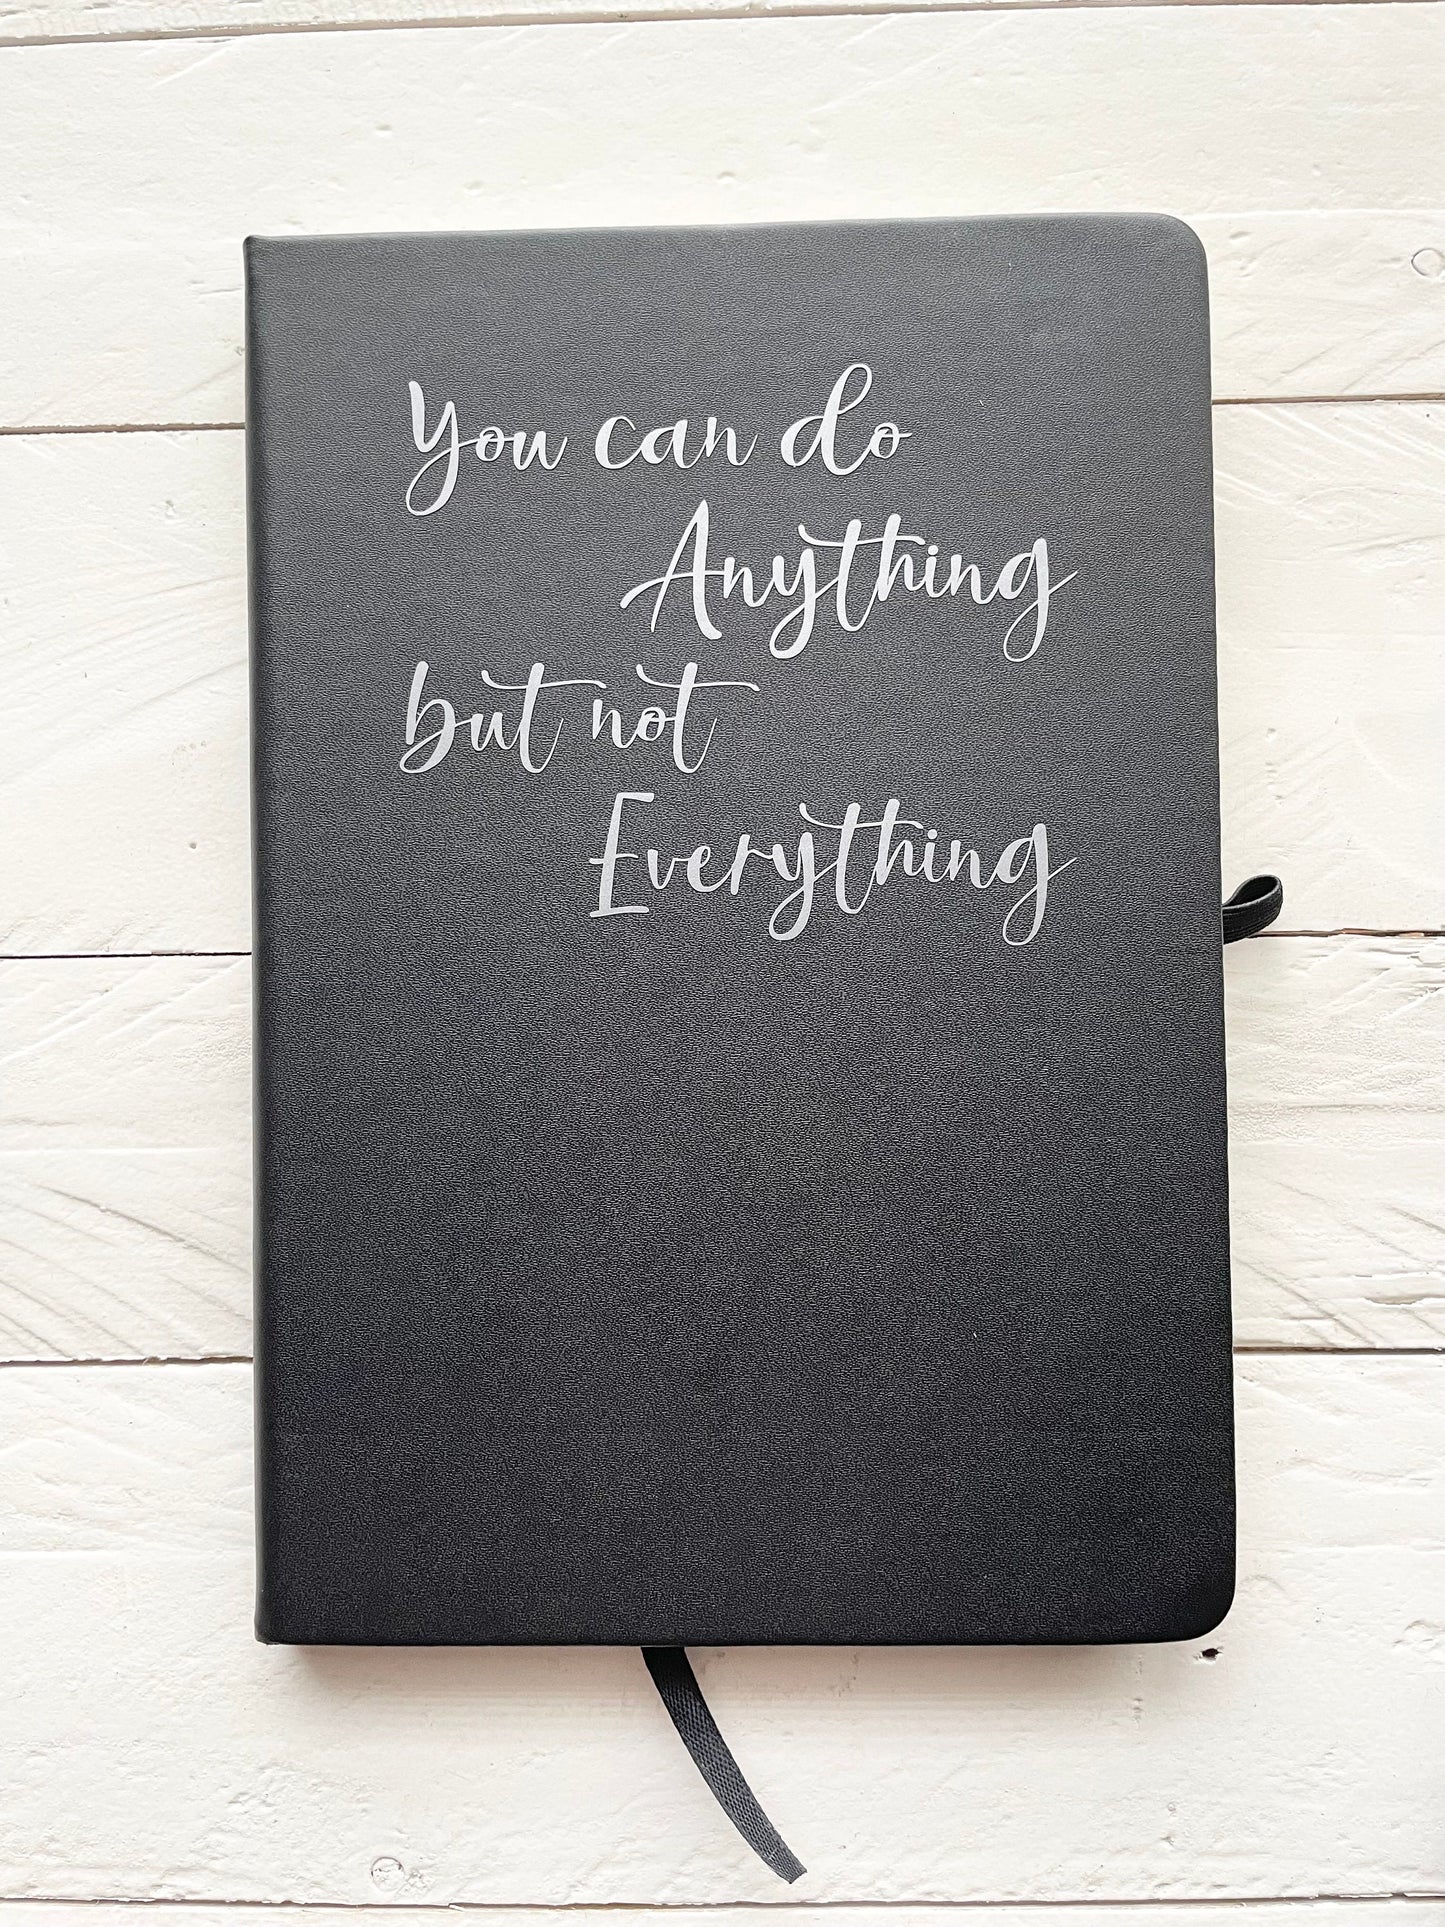 All my Bad Ideas, Shit I can’t say, You can do anything but not everything, Black Lined Journal